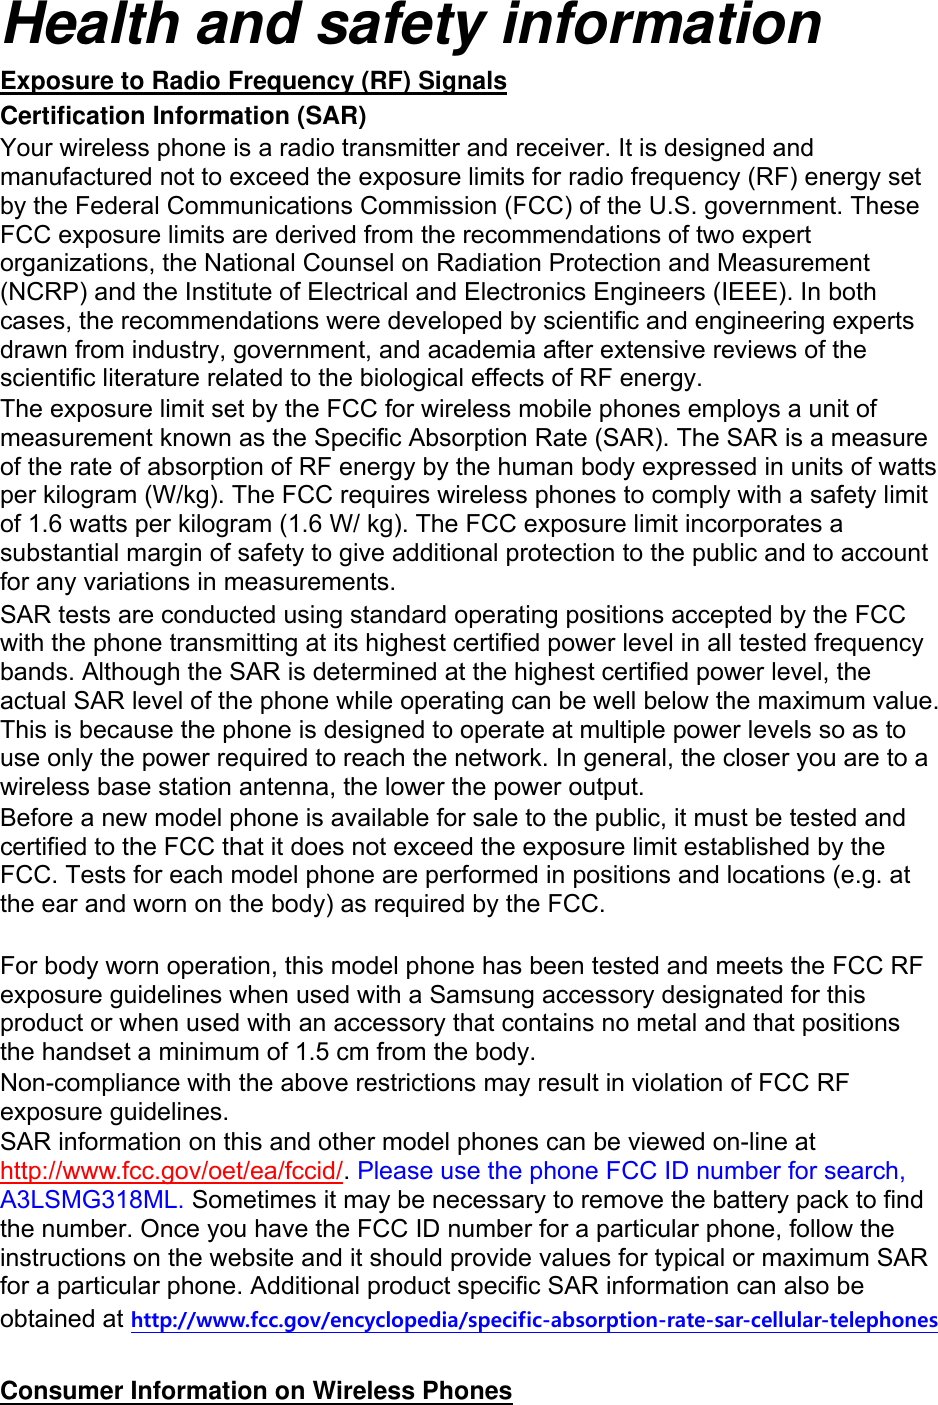 Health and safety information Exposure to Radio Frequency (RF) Signals Certification Information (SAR) Your wireless phone is a radio transmitter and receiver. It is designed and manufactured not to exceed the exposure limits for radio frequency (RF) energy set by the Federal Communications Commission (FCC) of the U.S. government. These FCC exposure limits are derived from the recommendations of two expert organizations, the National Counsel on Radiation Protection and Measurement (NCRP) and the Institute of Electrical and Electronics Engineers (IEEE). In both cases, the recommendations were developed by scientific and engineering experts drawn from industry, government, and academia after extensive reviews of the scientific literature related to the biological effects of RF energy. The exposure limit set by the FCC for wireless mobile phones employs a unit of measurement known as the Specific Absorption Rate (SAR). The SAR is a measure of the rate of absorption of RF energy by the human body expressed in units of watts per kilogram (W/kg). The FCC requires wireless phones to comply with a safety limit of 1.6 watts per kilogram (1.6 W/ kg). The FCC exposure limit incorporates a substantial margin of safety to give additional protection to the public and to account for any variations in measurements. SAR tests are conducted using standard operating positions accepted by the FCC with the phone transmitting at its highest certified power level in all tested frequency bands. Although the SAR is determined at the highest certified power level, the actual SAR level of the phone while operating can be well below the maximum value. This is because the phone is designed to operate at multiple power levels so as to use only the power required to reach the network. In general, the closer you are to a wireless base station antenna, the lower the power output. Before a new model phone is available for sale to the public, it must be tested and certified to the FCC that it does not exceed the exposure limit established by the FCC. Tests for each model phone are performed in positions and locations (e.g. at the ear and worn on the body) as required by the FCC.      For body worn operation, this model phone has been tested and meets the FCC RF exposure guidelines when used with a Samsung accessory designated for this product or when used with an accessory that contains no metal and that positions the handset a minimum of 1.5 cm from the body.   Non-compliance with the above restrictions may result in violation of FCC RF exposure guidelines. SAR information on this and other model phones can be viewed on-line at http://www.fcc.gov/oet/ea/fccid/. Please use the phone FCC ID number for search, A3LSMG318ML. Sometimes it may be necessary to remove the battery pack to find the number. Once you have the FCC ID number for a particular phone, follow the instructions on the website and it should provide values for typical or maximum SAR for a particular phone. Additional product specific SAR information can also be obtained at http://www.fcc.gov/encyclopedia/specific-absorption-rate-sar-cellular-telephones  Consumer Information on Wireless Phones 